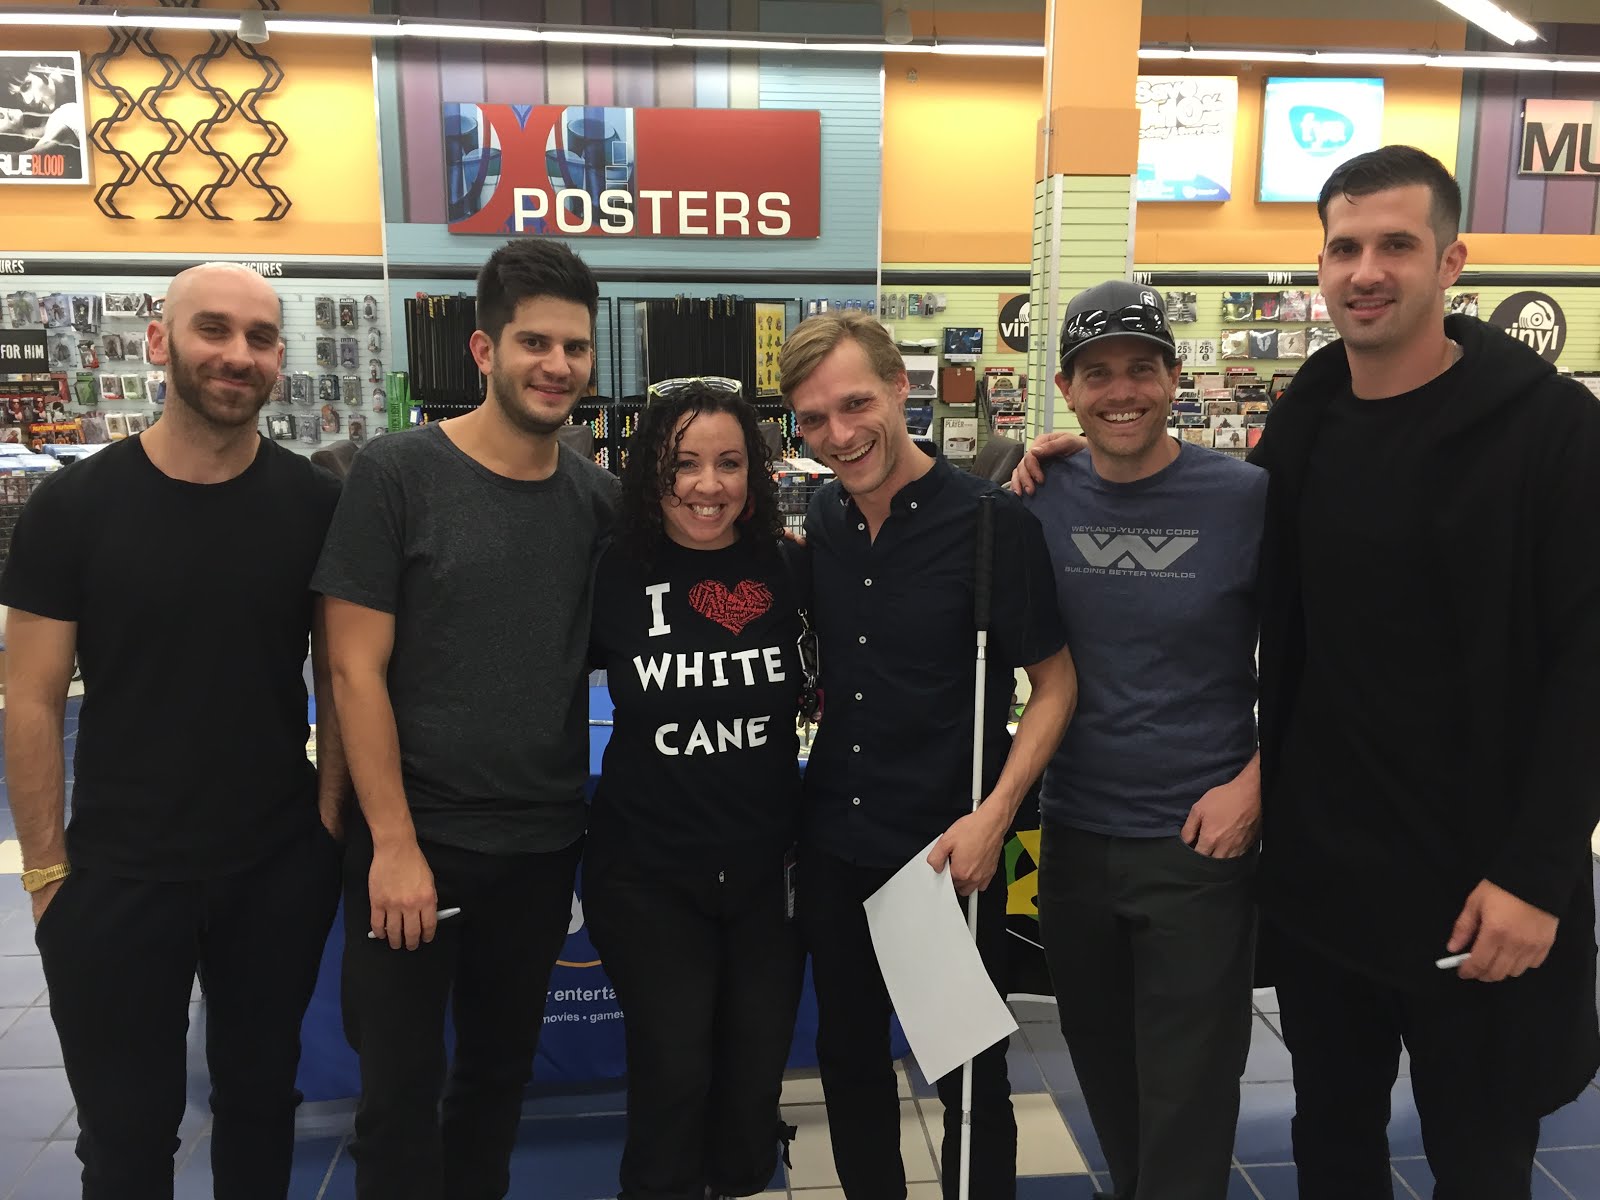 Me with the X Ambassadors